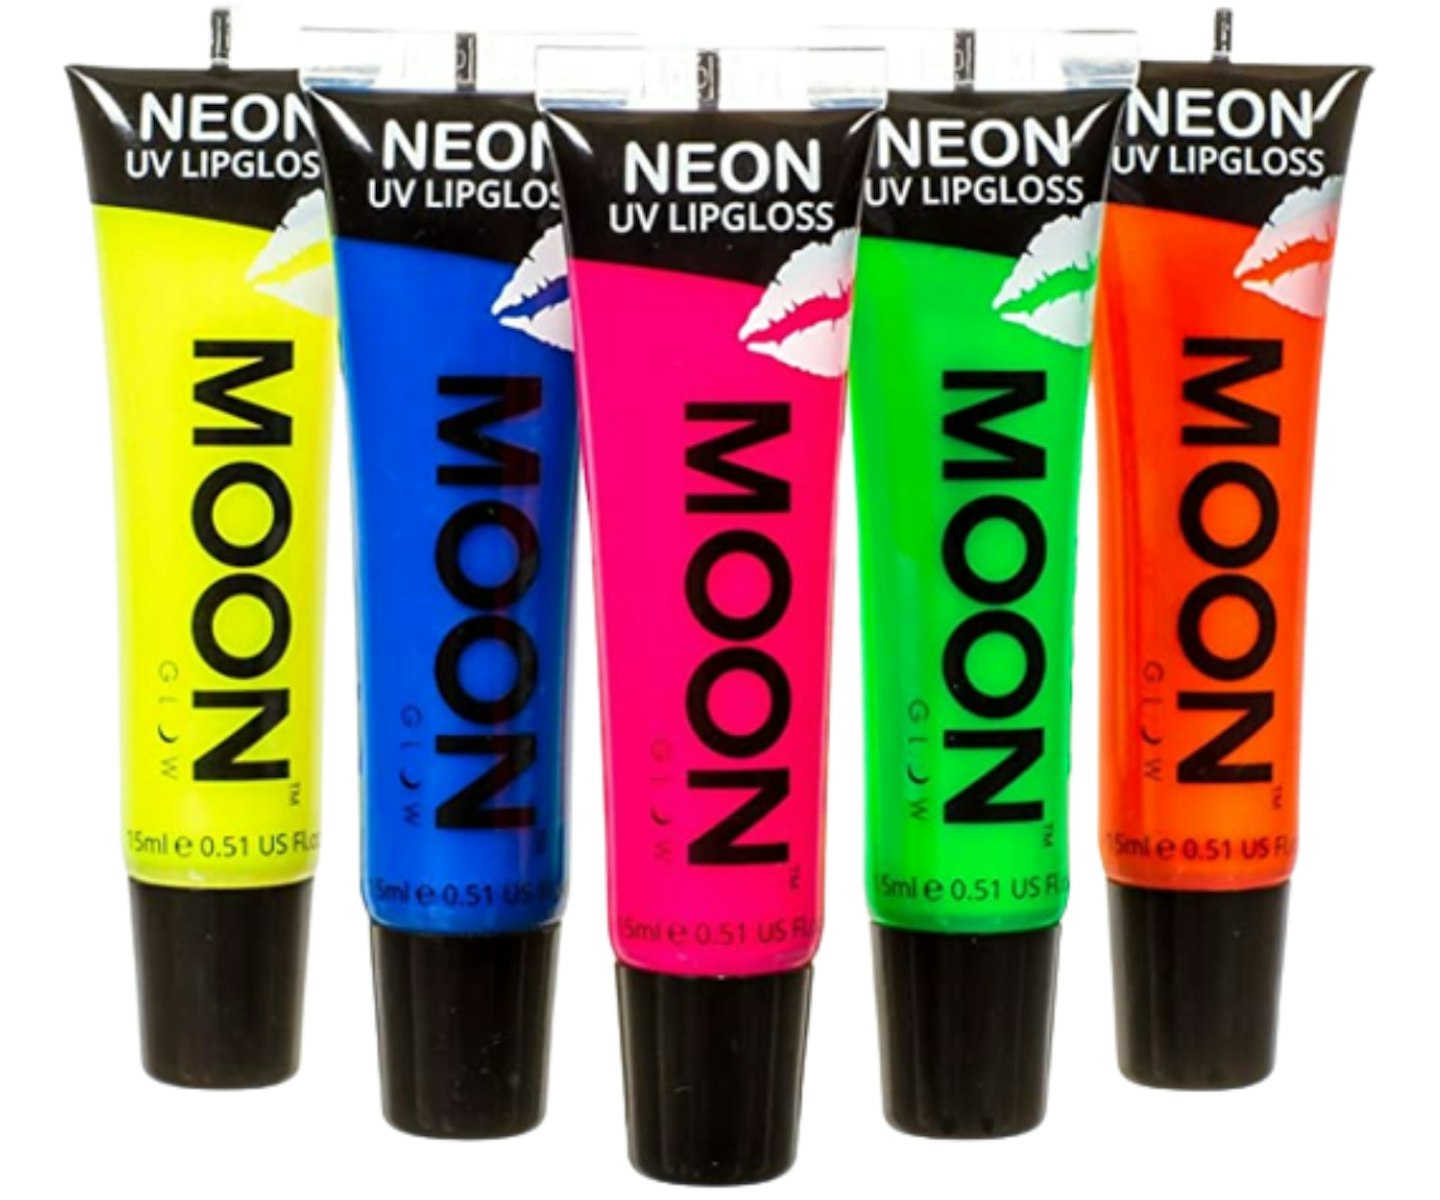 A picture of the Moon Glow Neon UV Lip Gloss Set.